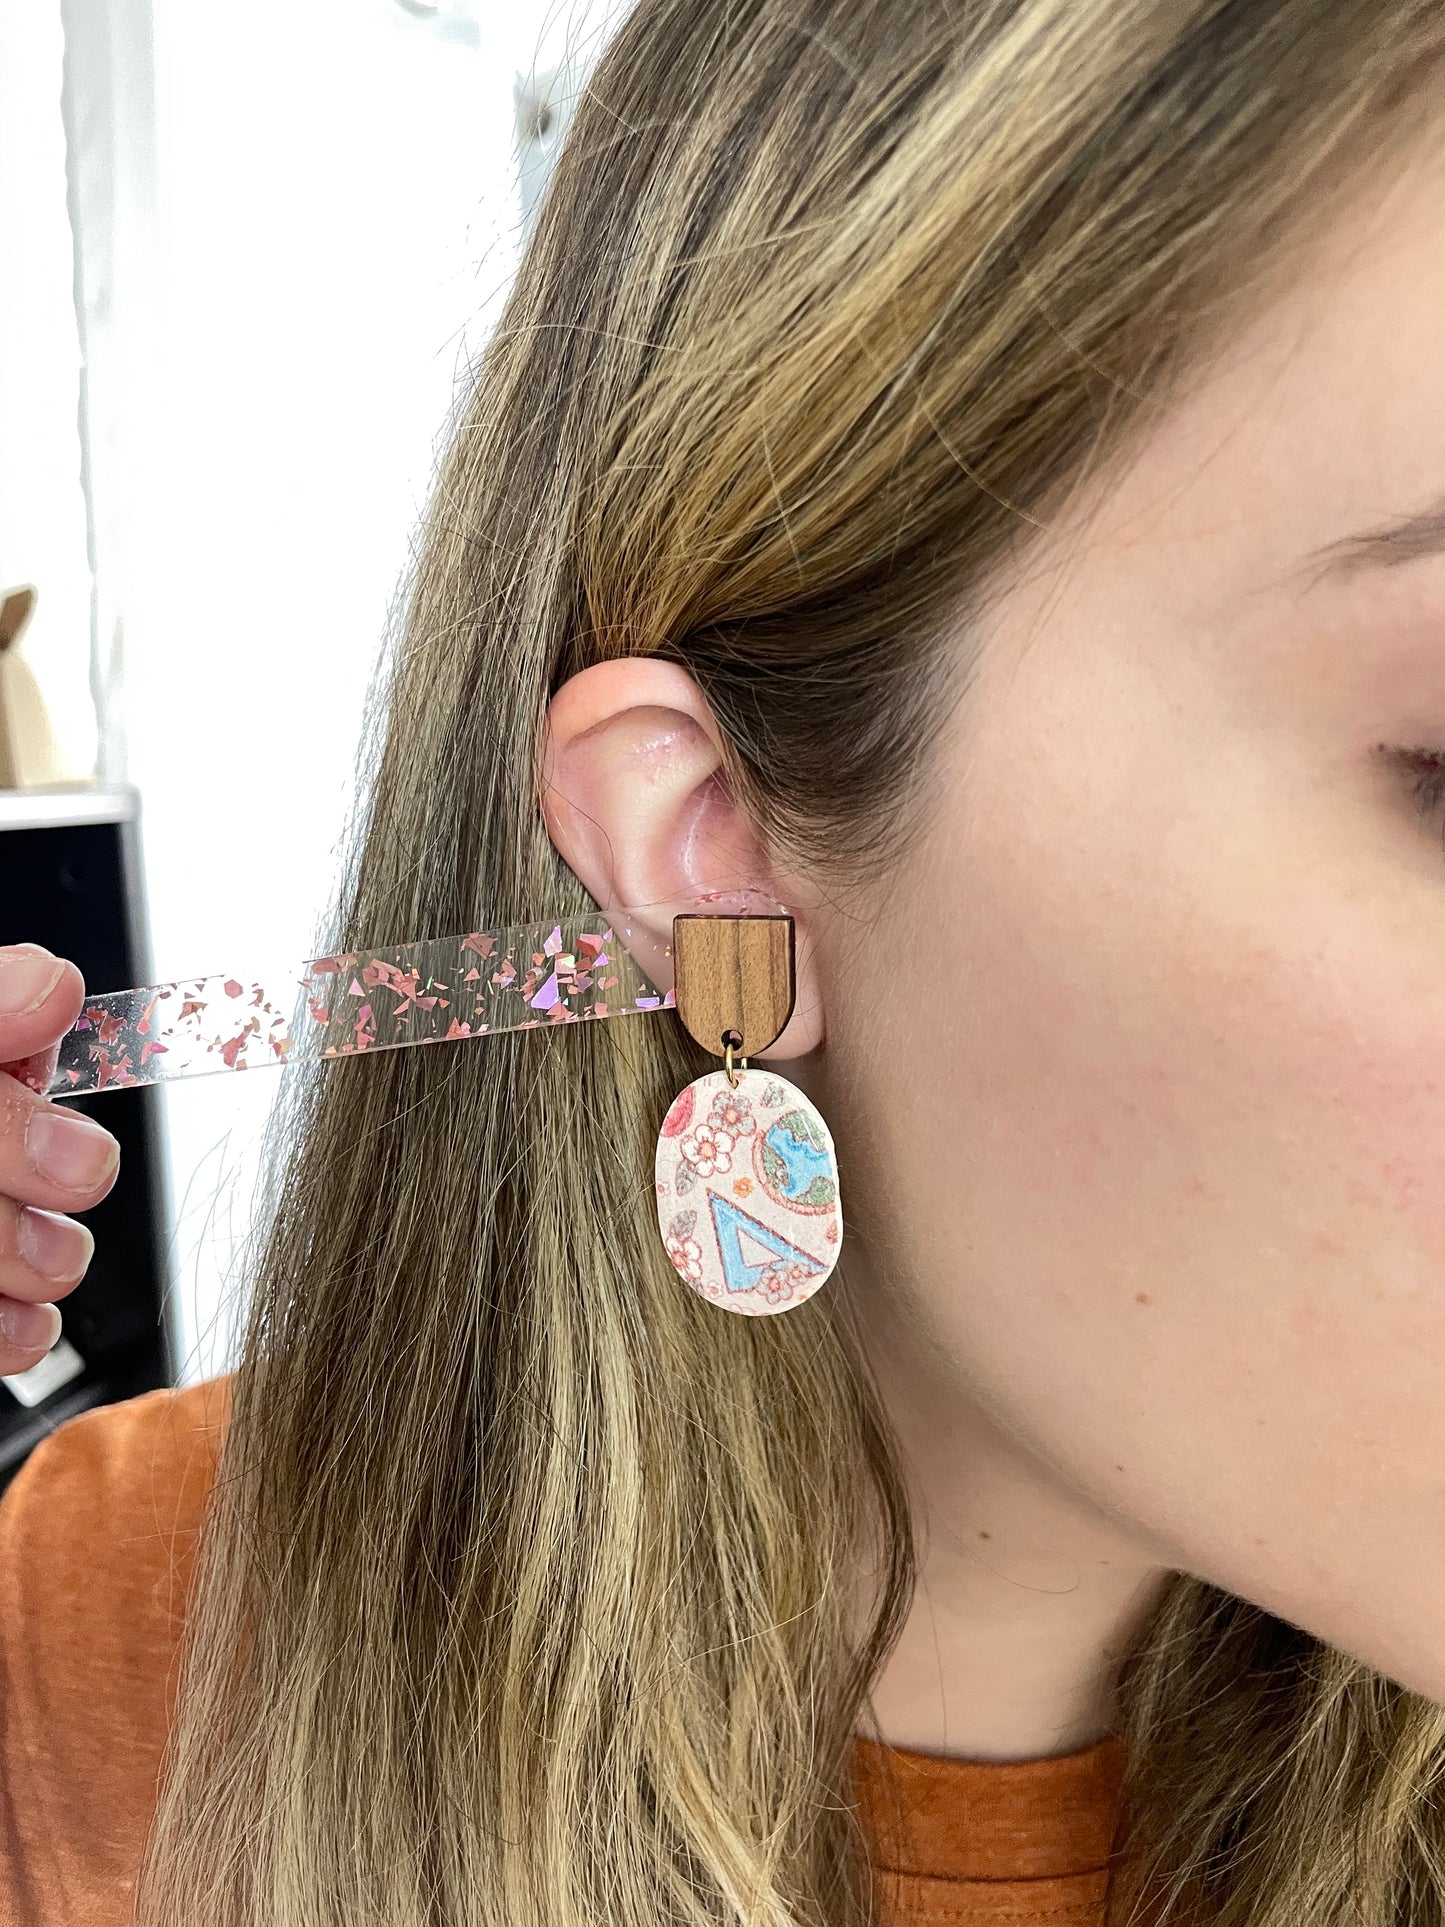 Back to School Patterned Dangles